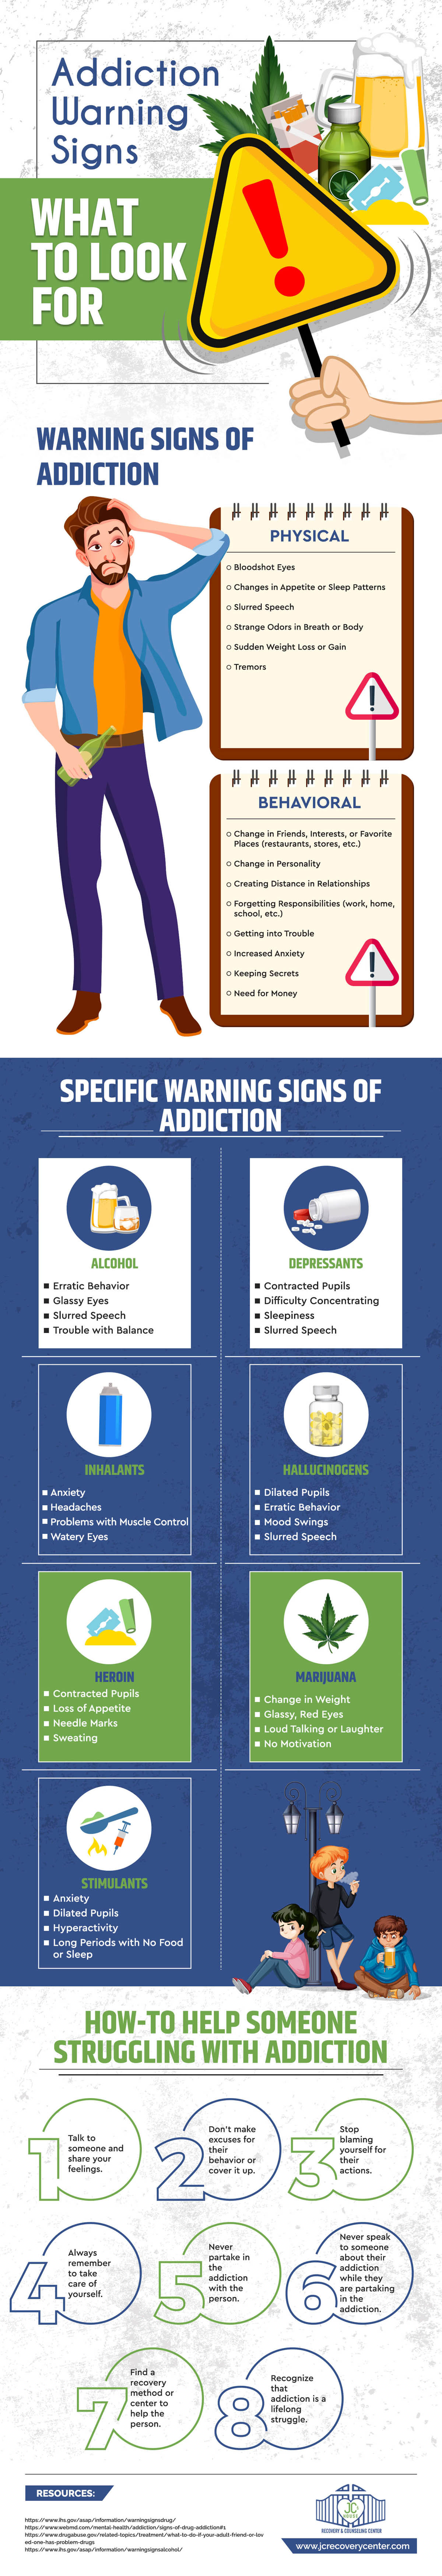 Addiction Warning Signs: What to Look For